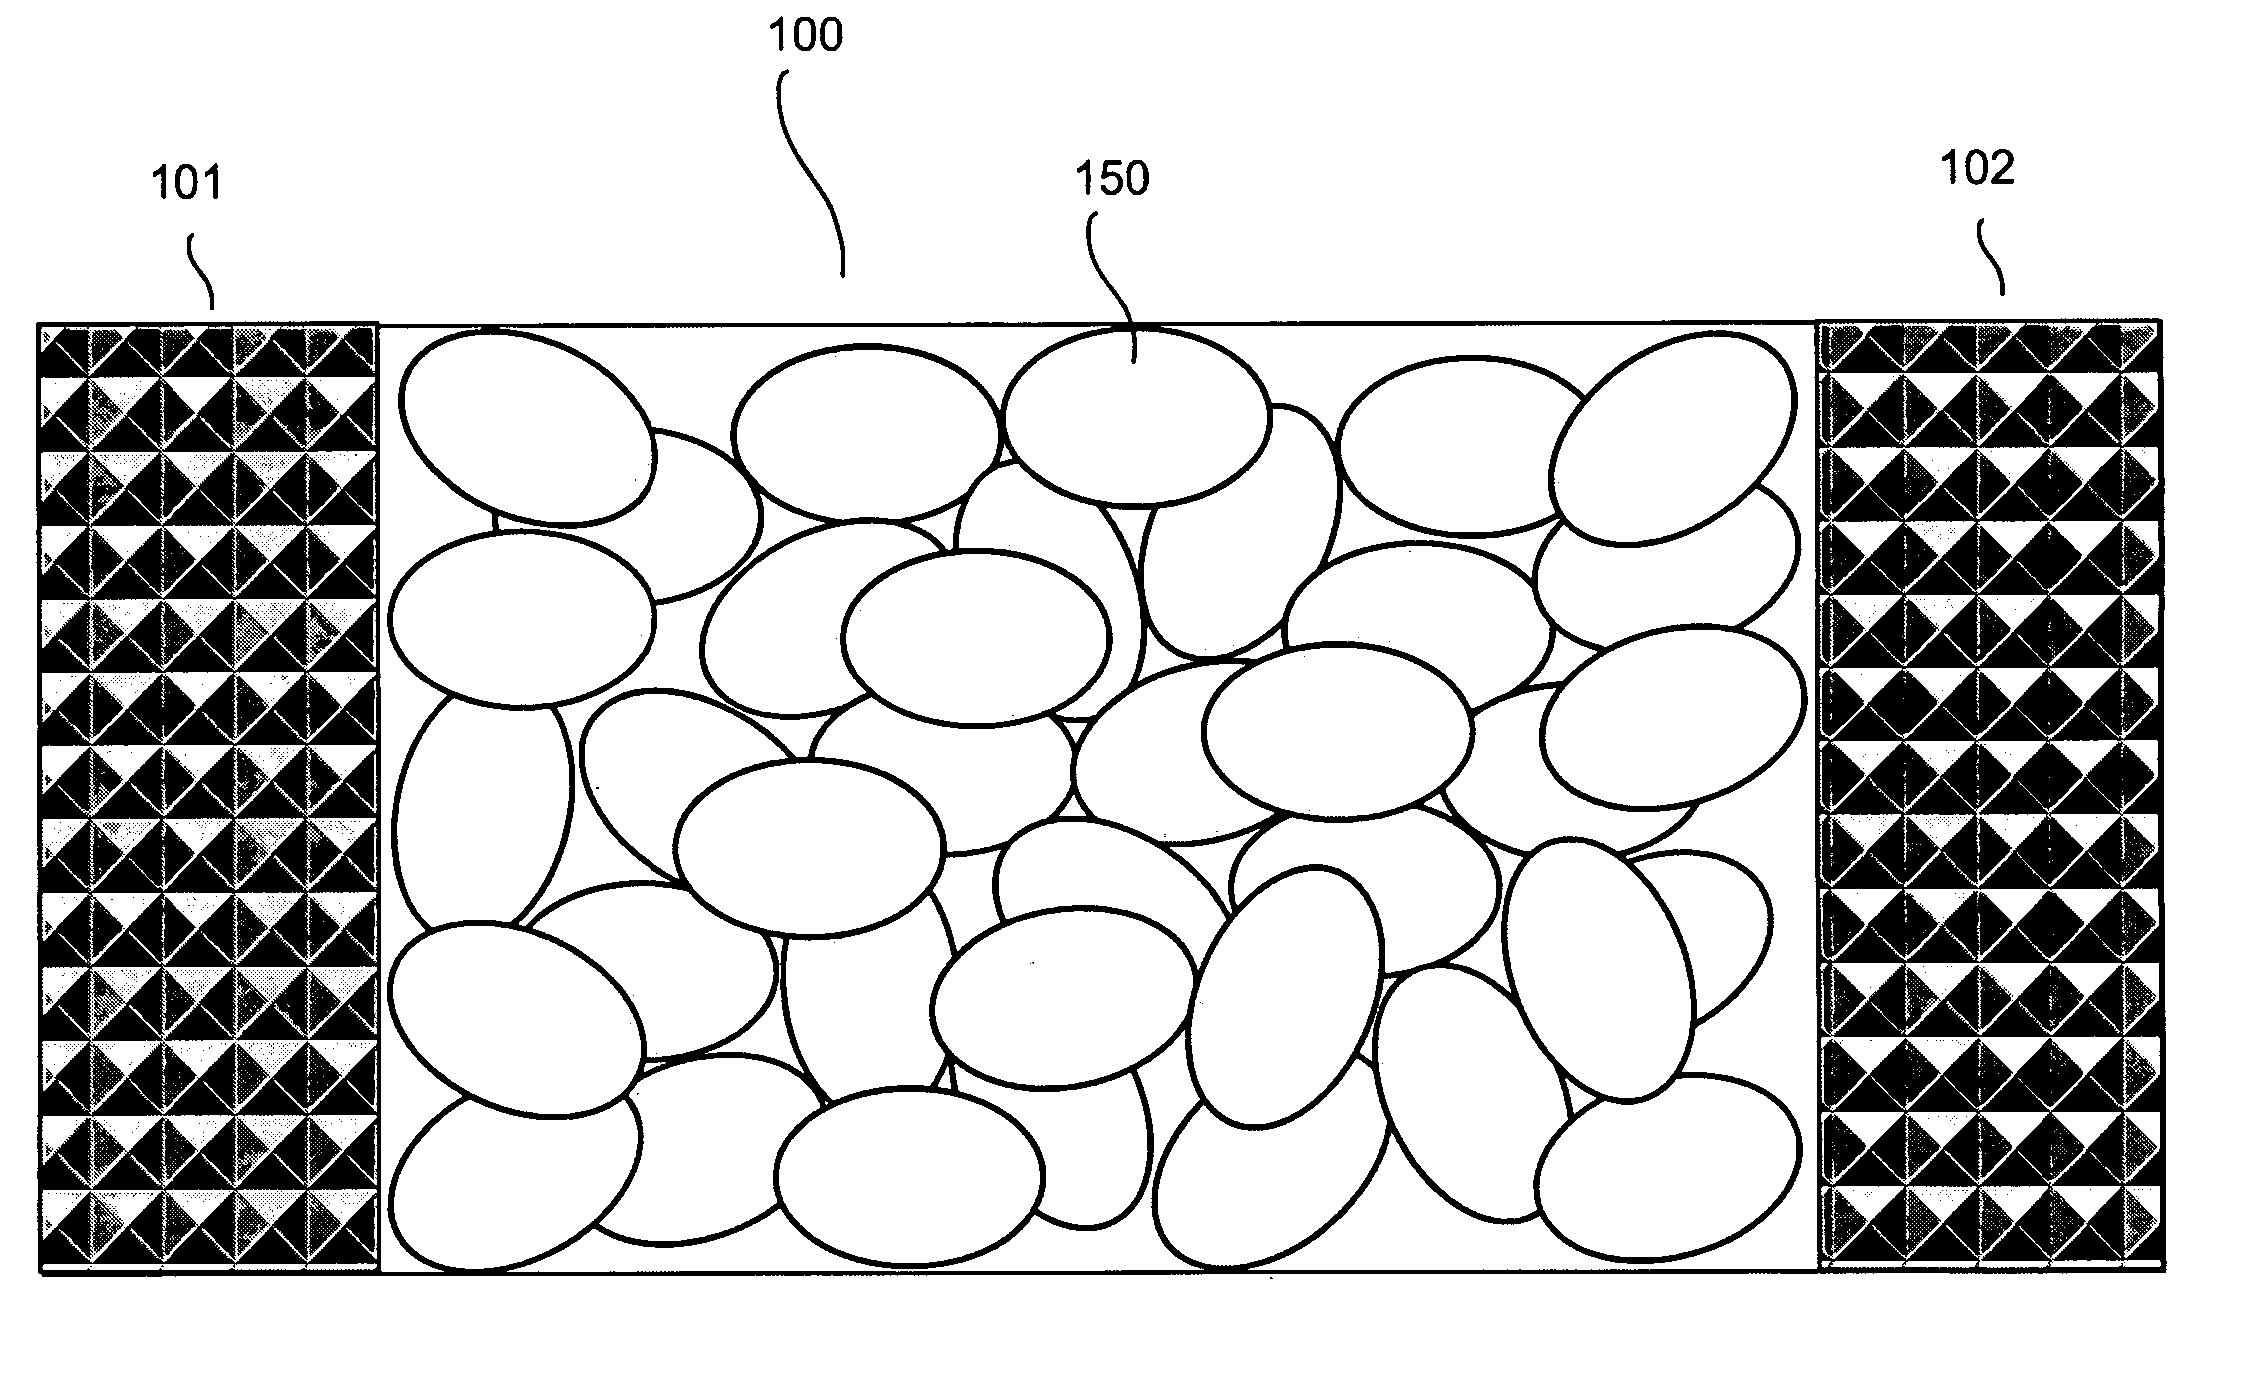 Conformable thermal pack apparatus, manufacture and method